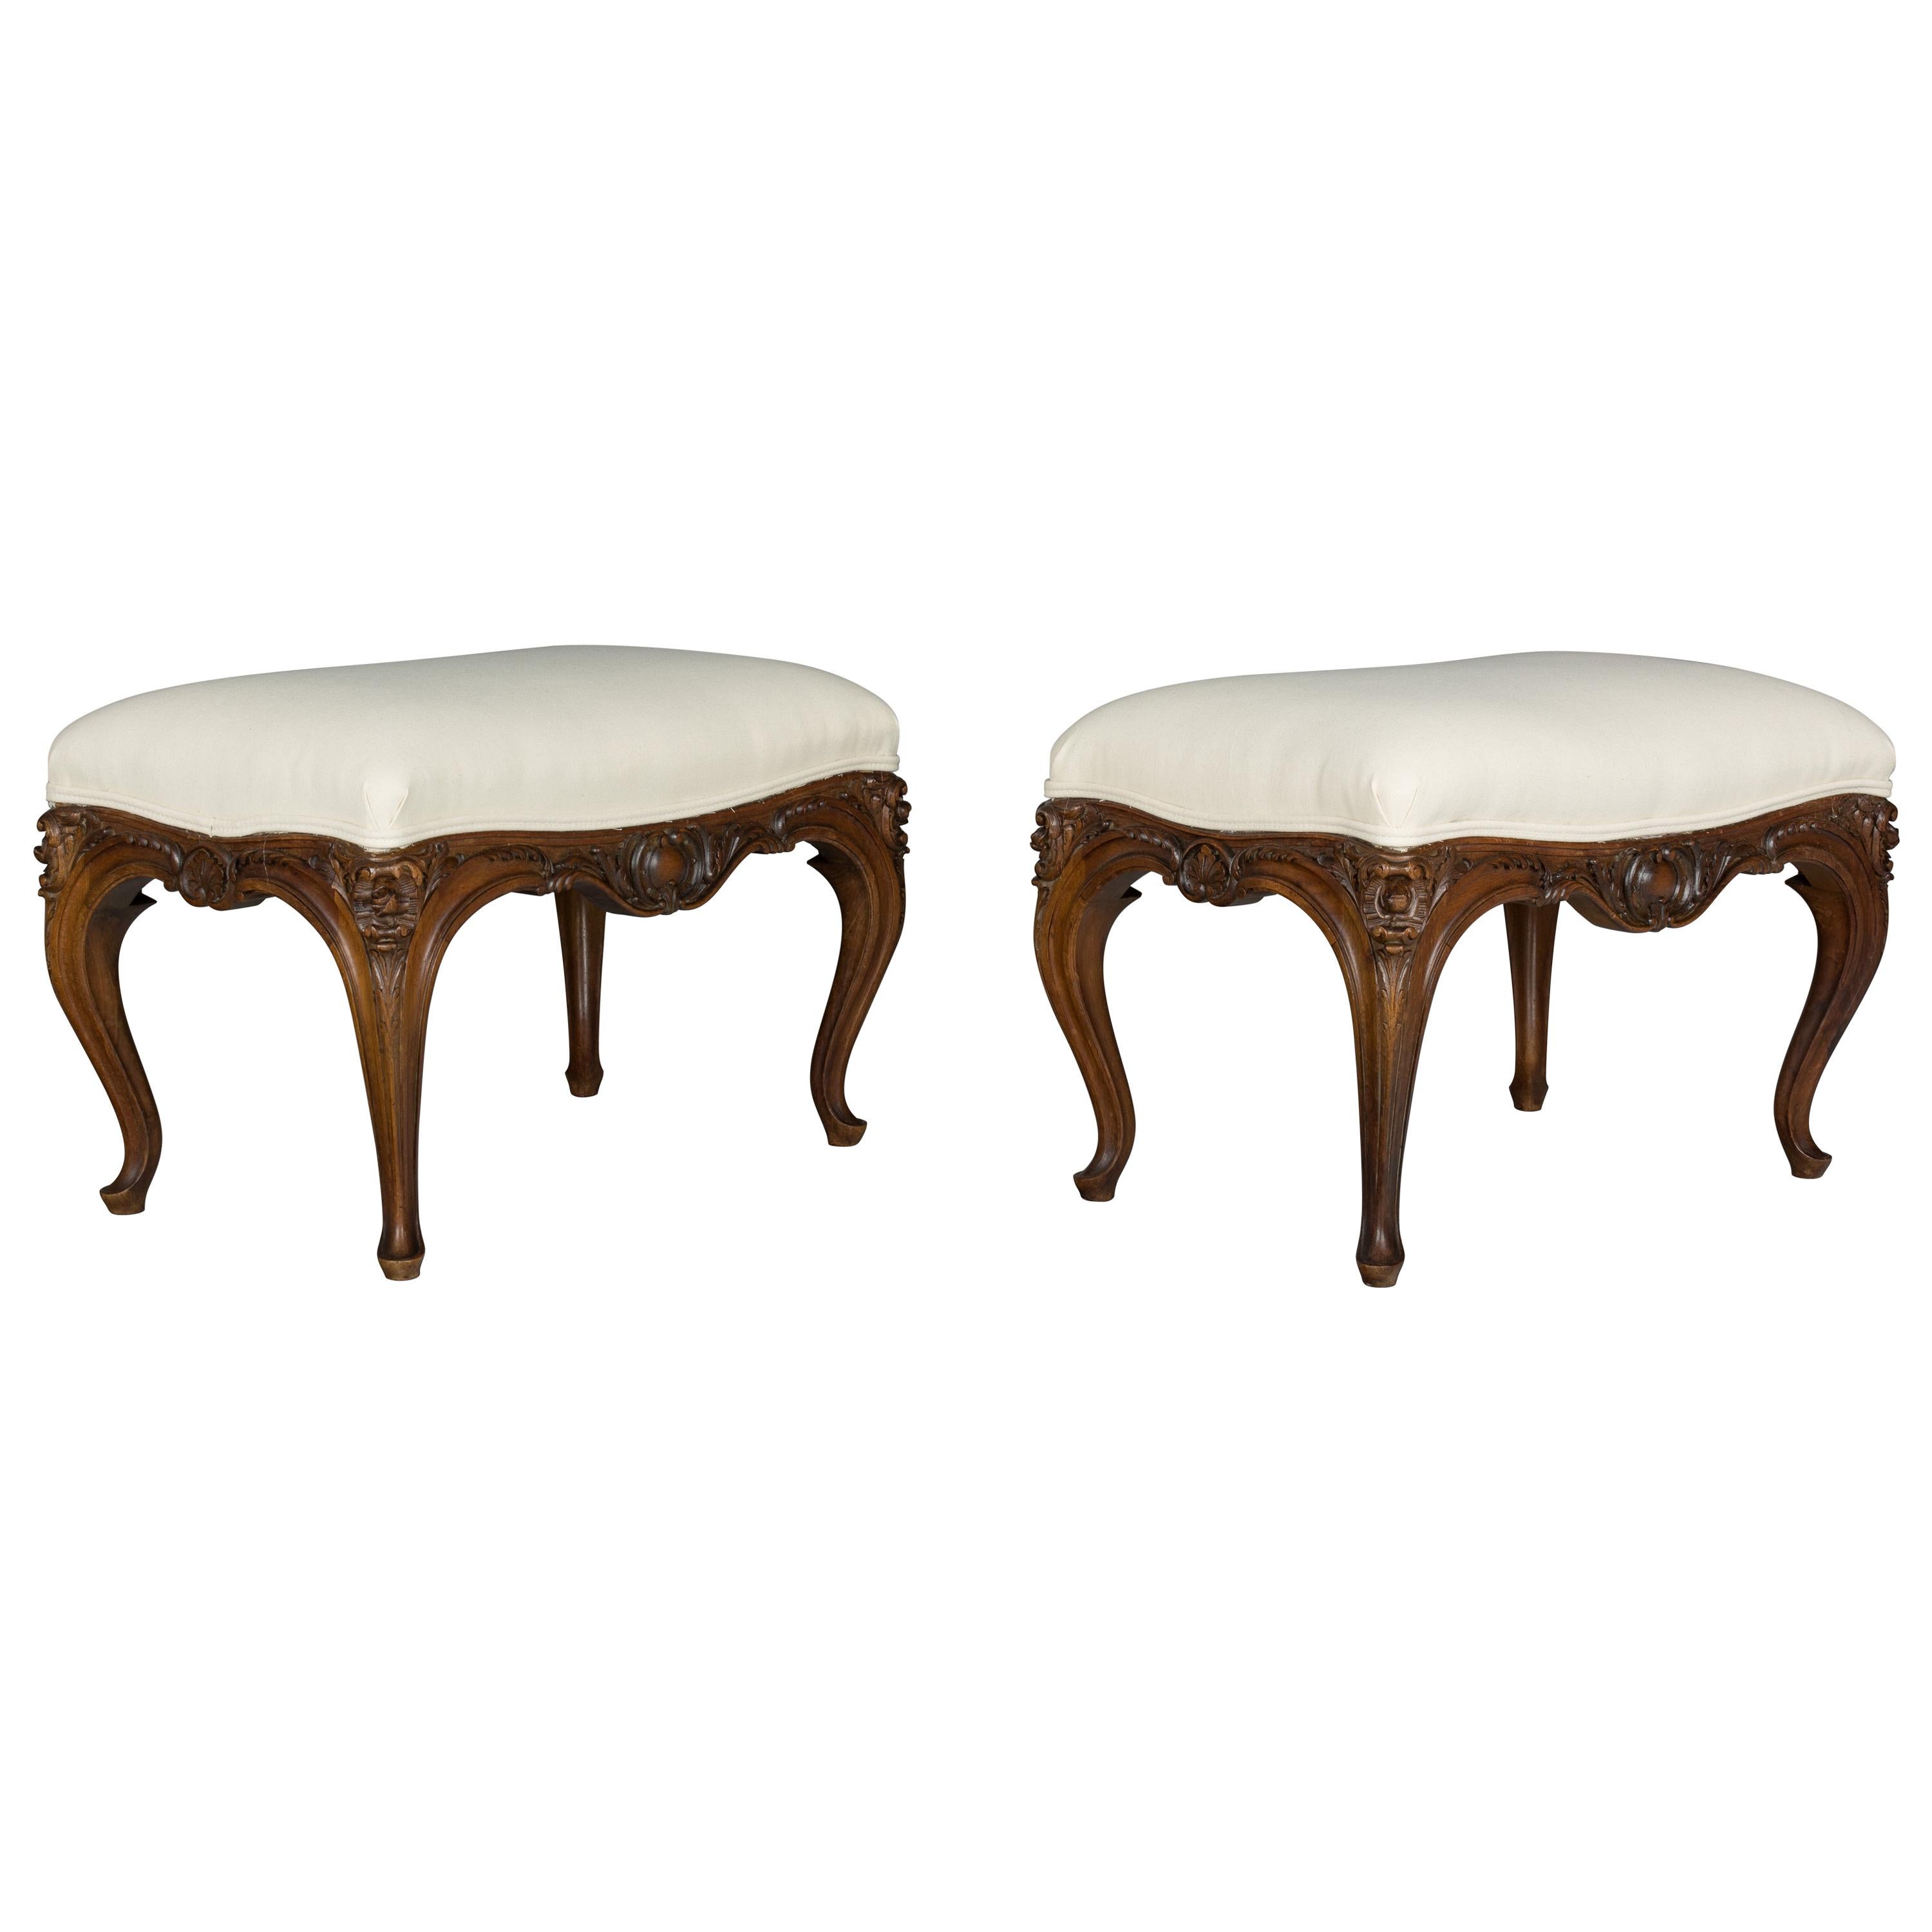 Pair of Louis XV Style Foot Stool or Bench